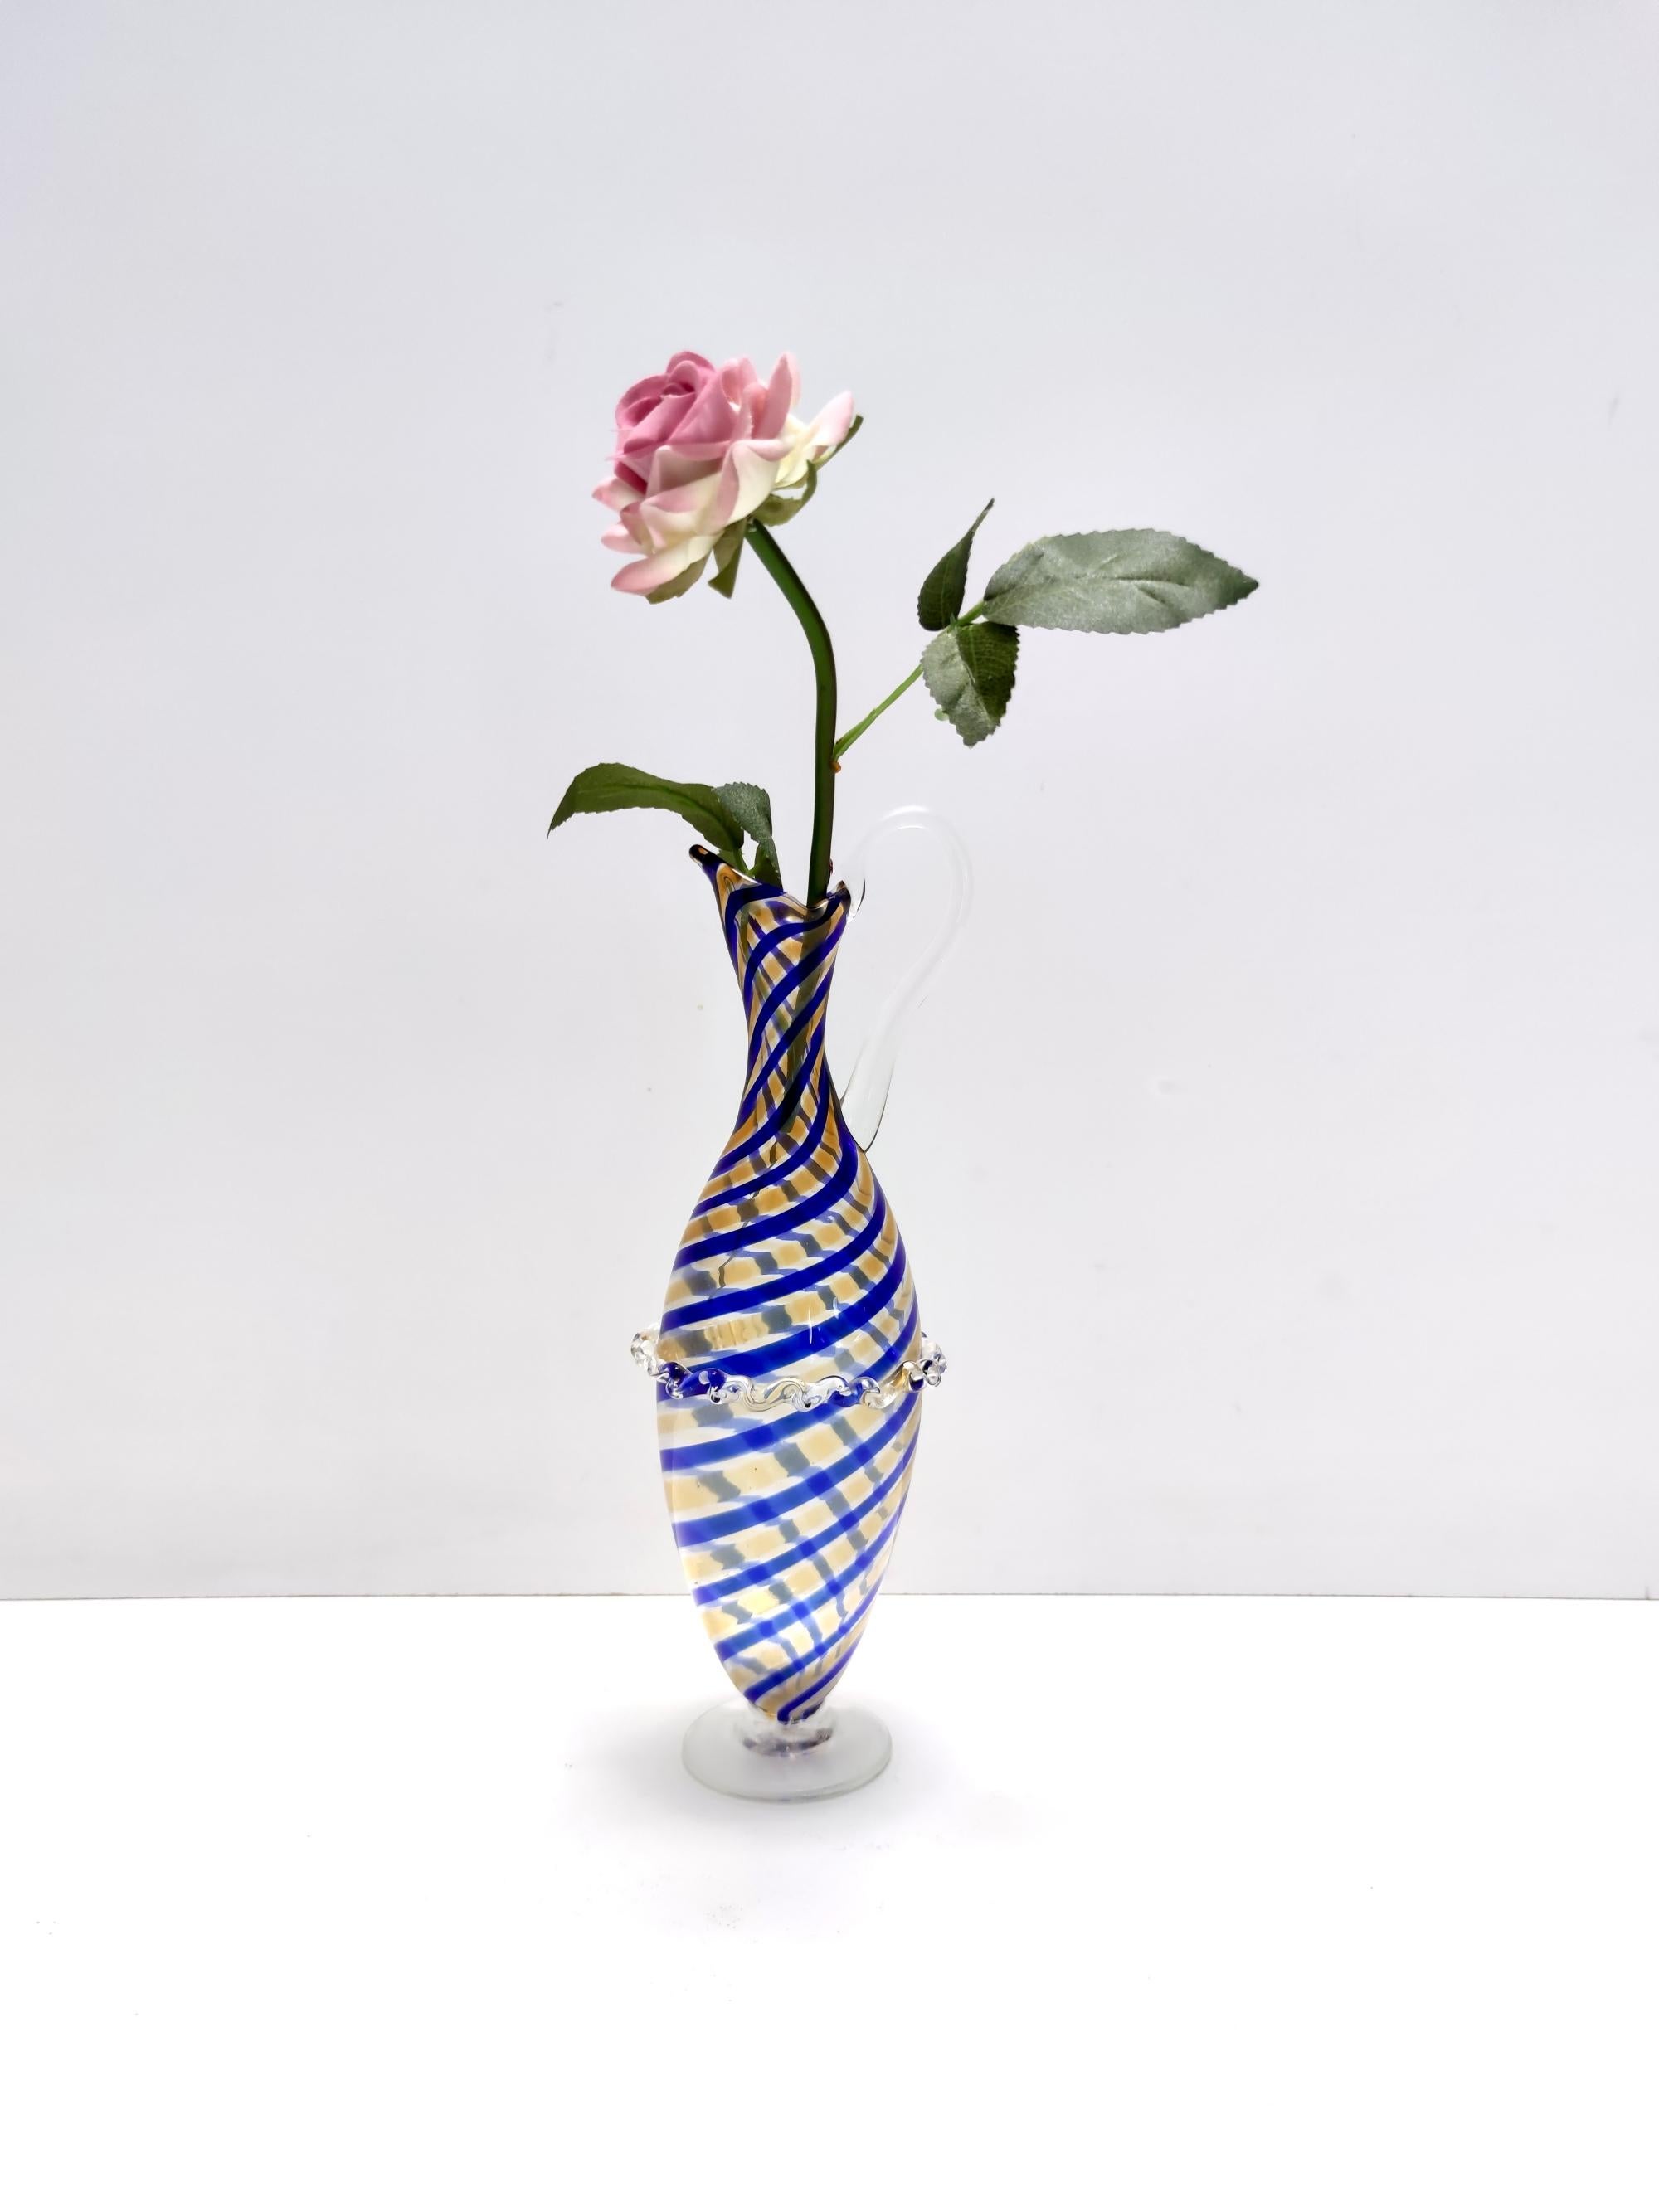 Made in Italy, 1940s - 1950s.
This pitcher vase is made in Murano glass and features royal blue and yellow canes and a transparent base and handle.
It is a vintage item, therefore it might show slight traces of use, but it can be considered as in